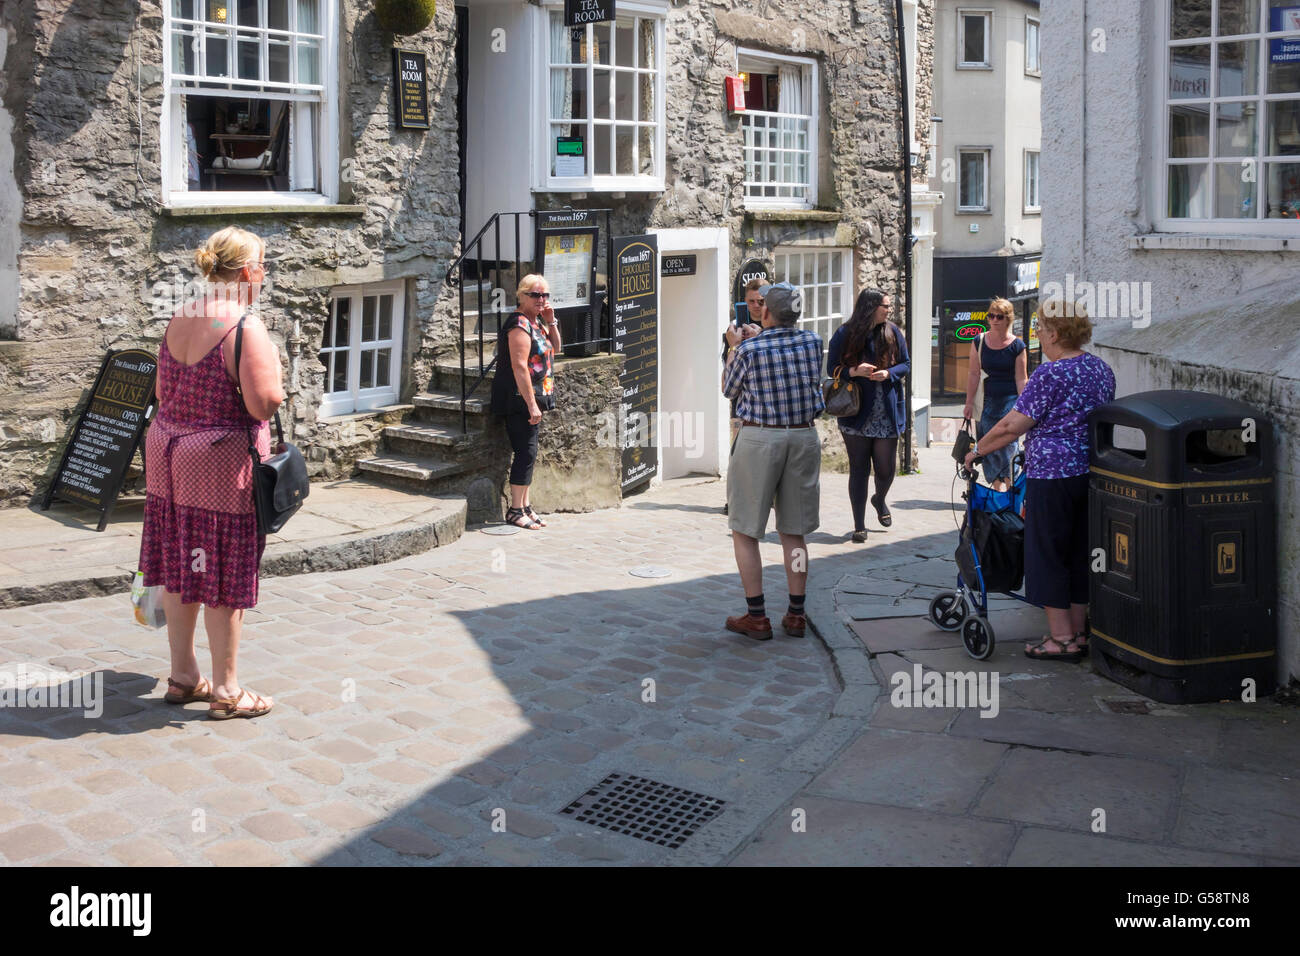 Tourists in Branthwaite Brow Kendal outside the historic ChocOlate House Tea Room taking photographs with a smart phone Stock Photo